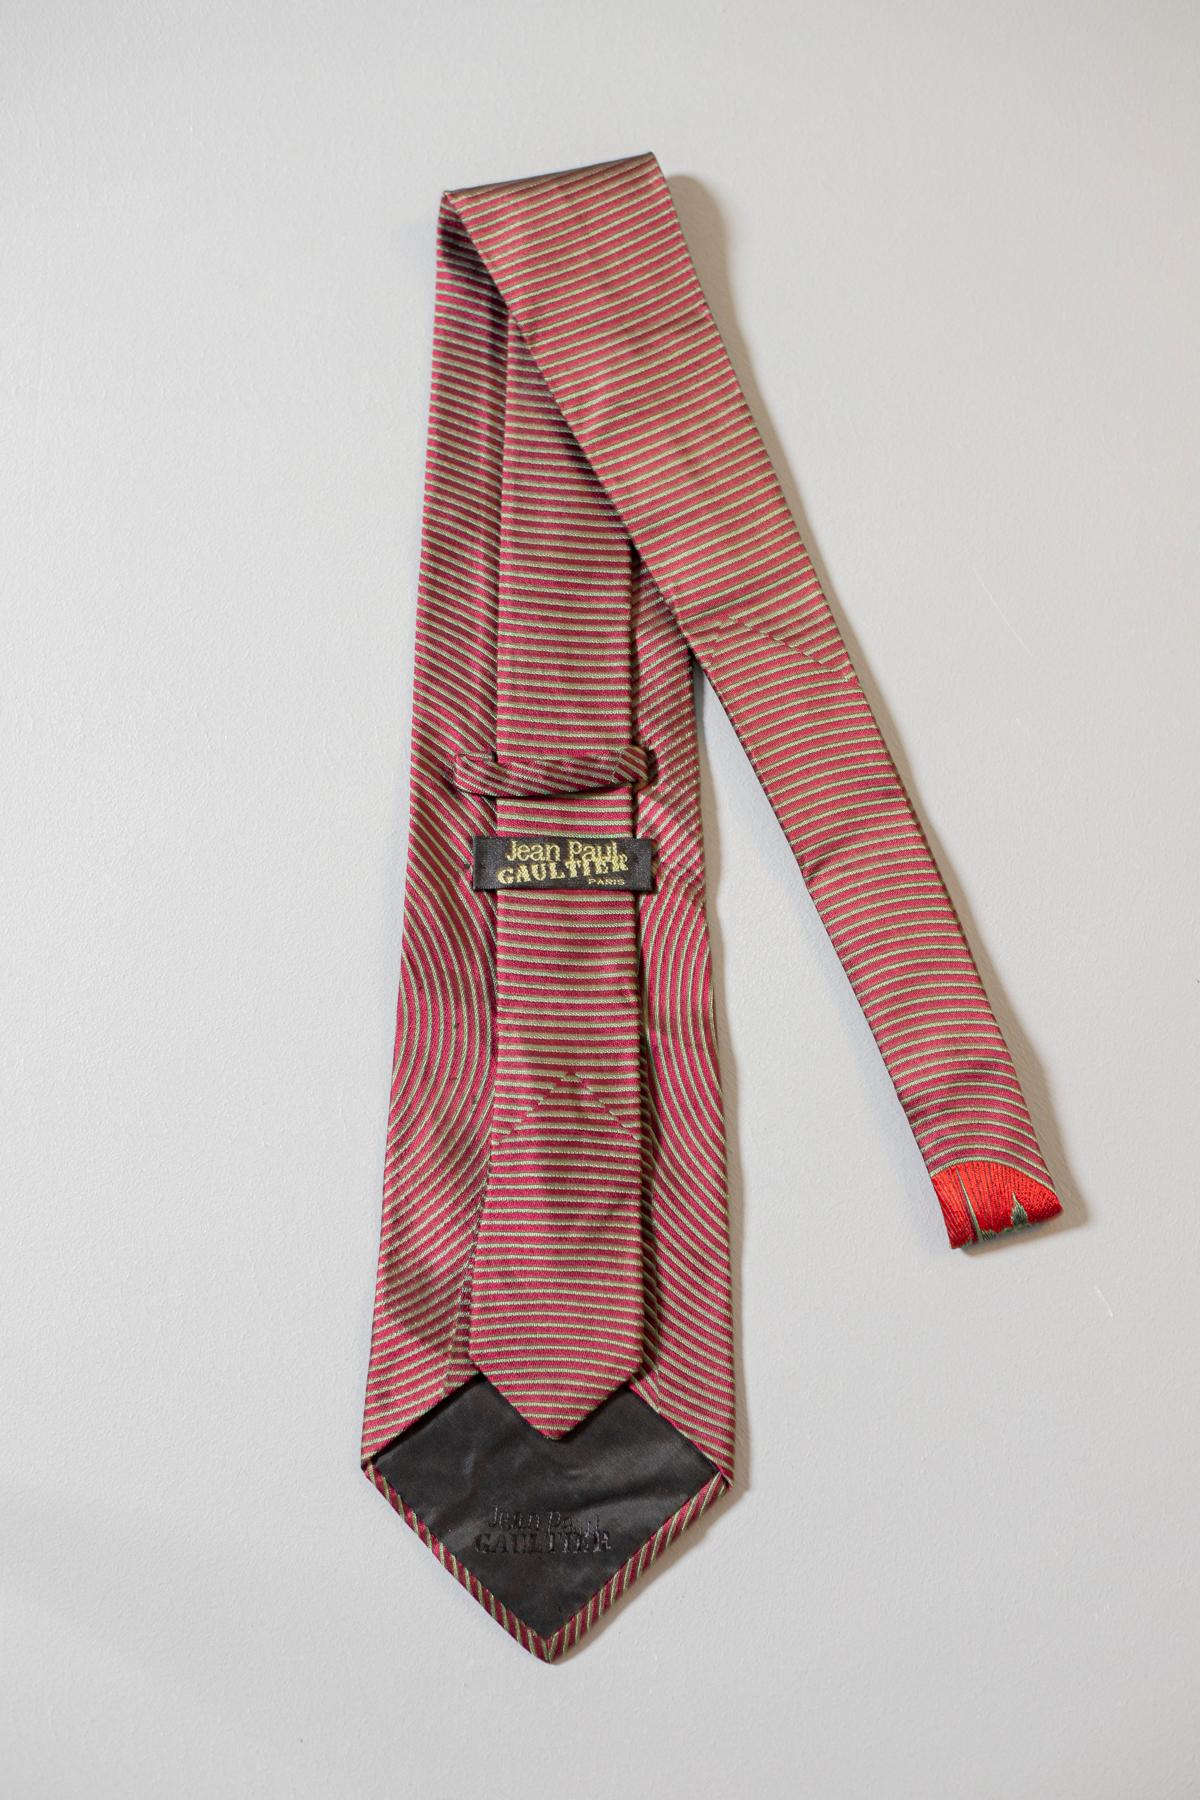 Unique and original, this all-silk tie was designed by Jean Paul Gaultier. It is in all-silk and it displays a golden heart with a sword on a golden and red background. This tie is perfect if you want to stand out from the crowd.